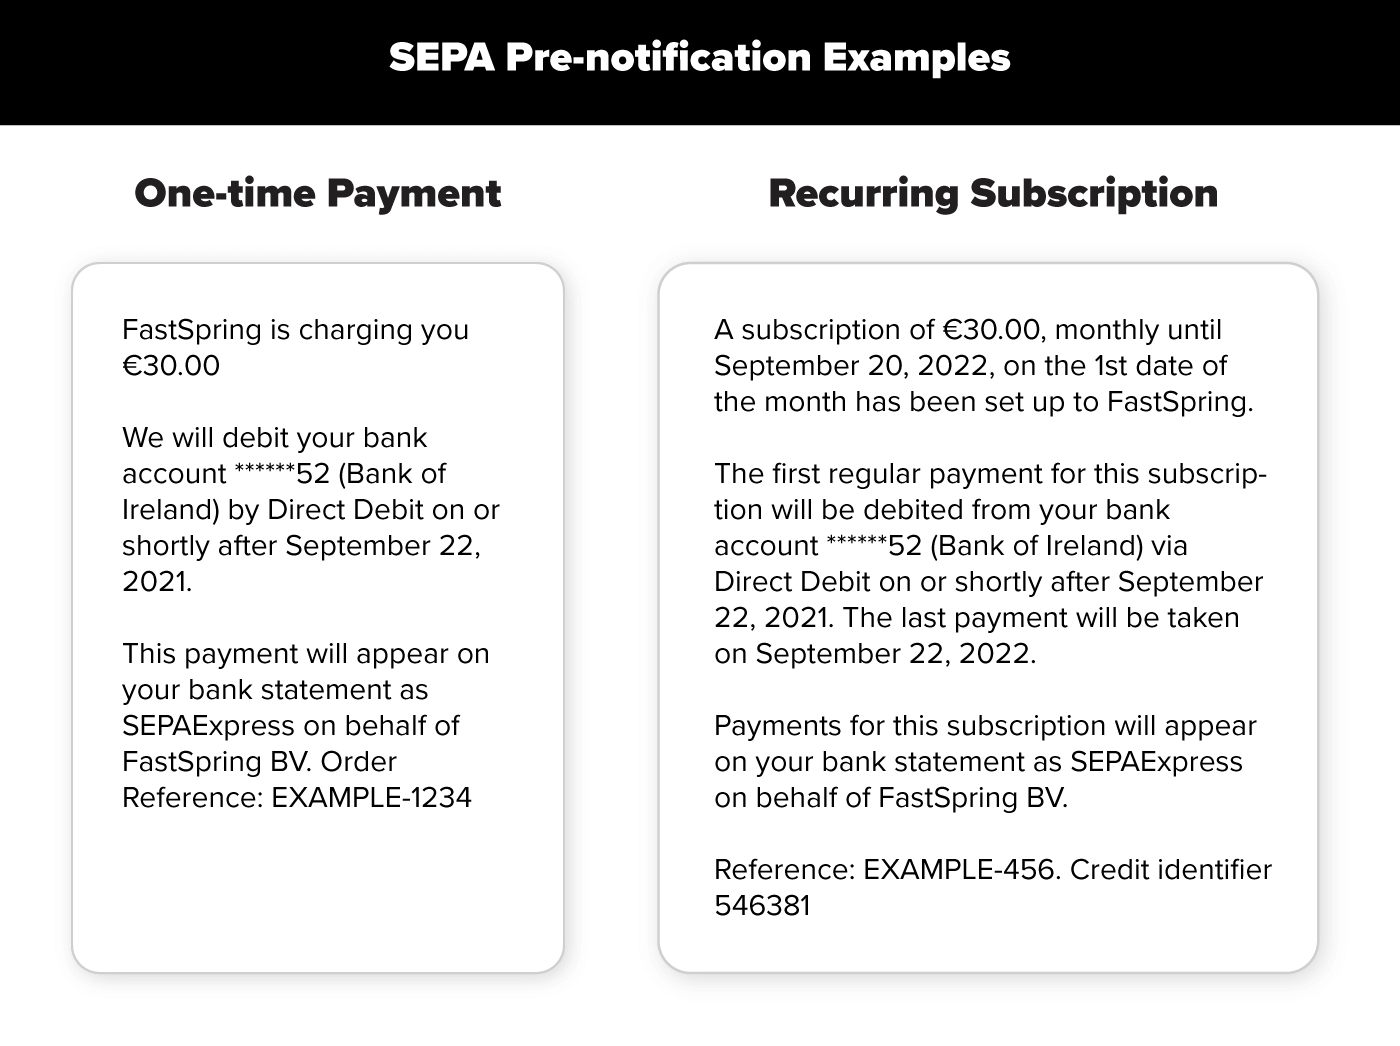 SEPA notification examples for one time and recurring payments